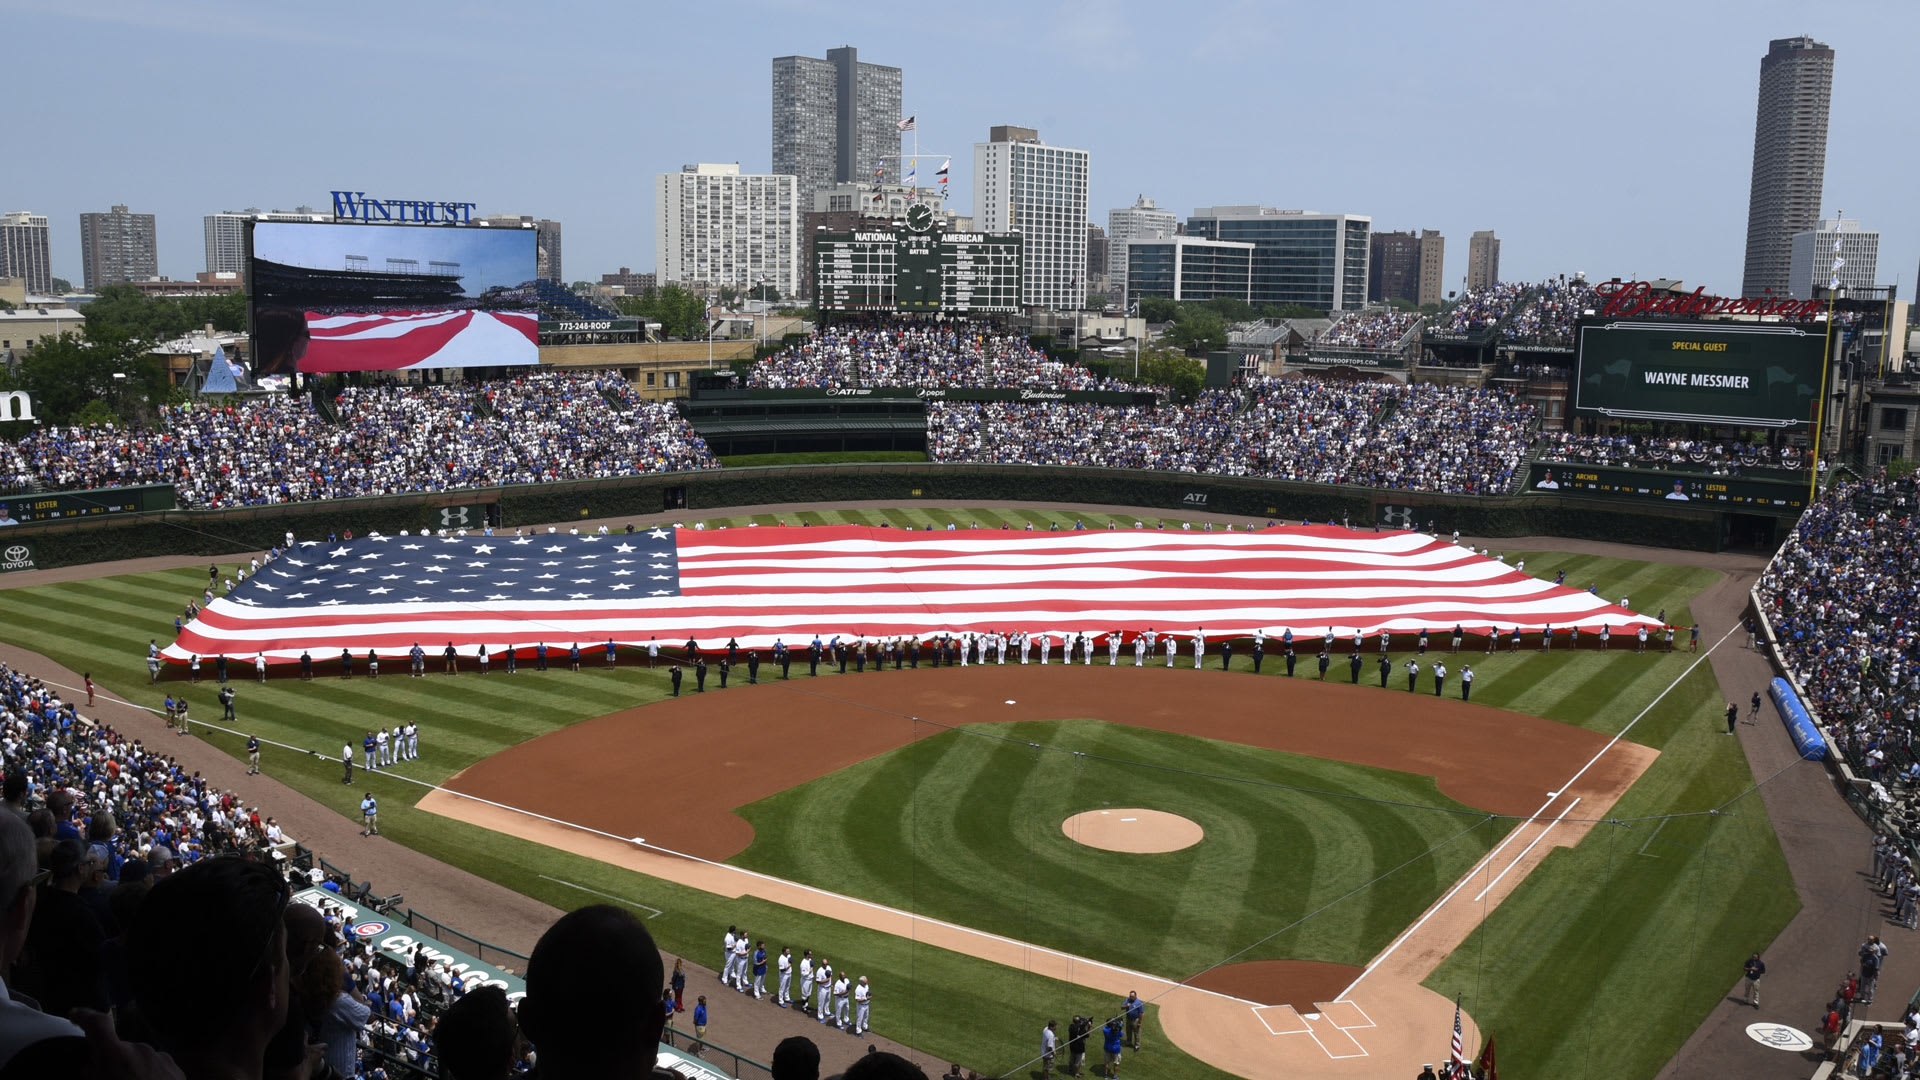 An American flag stretched across the outfield